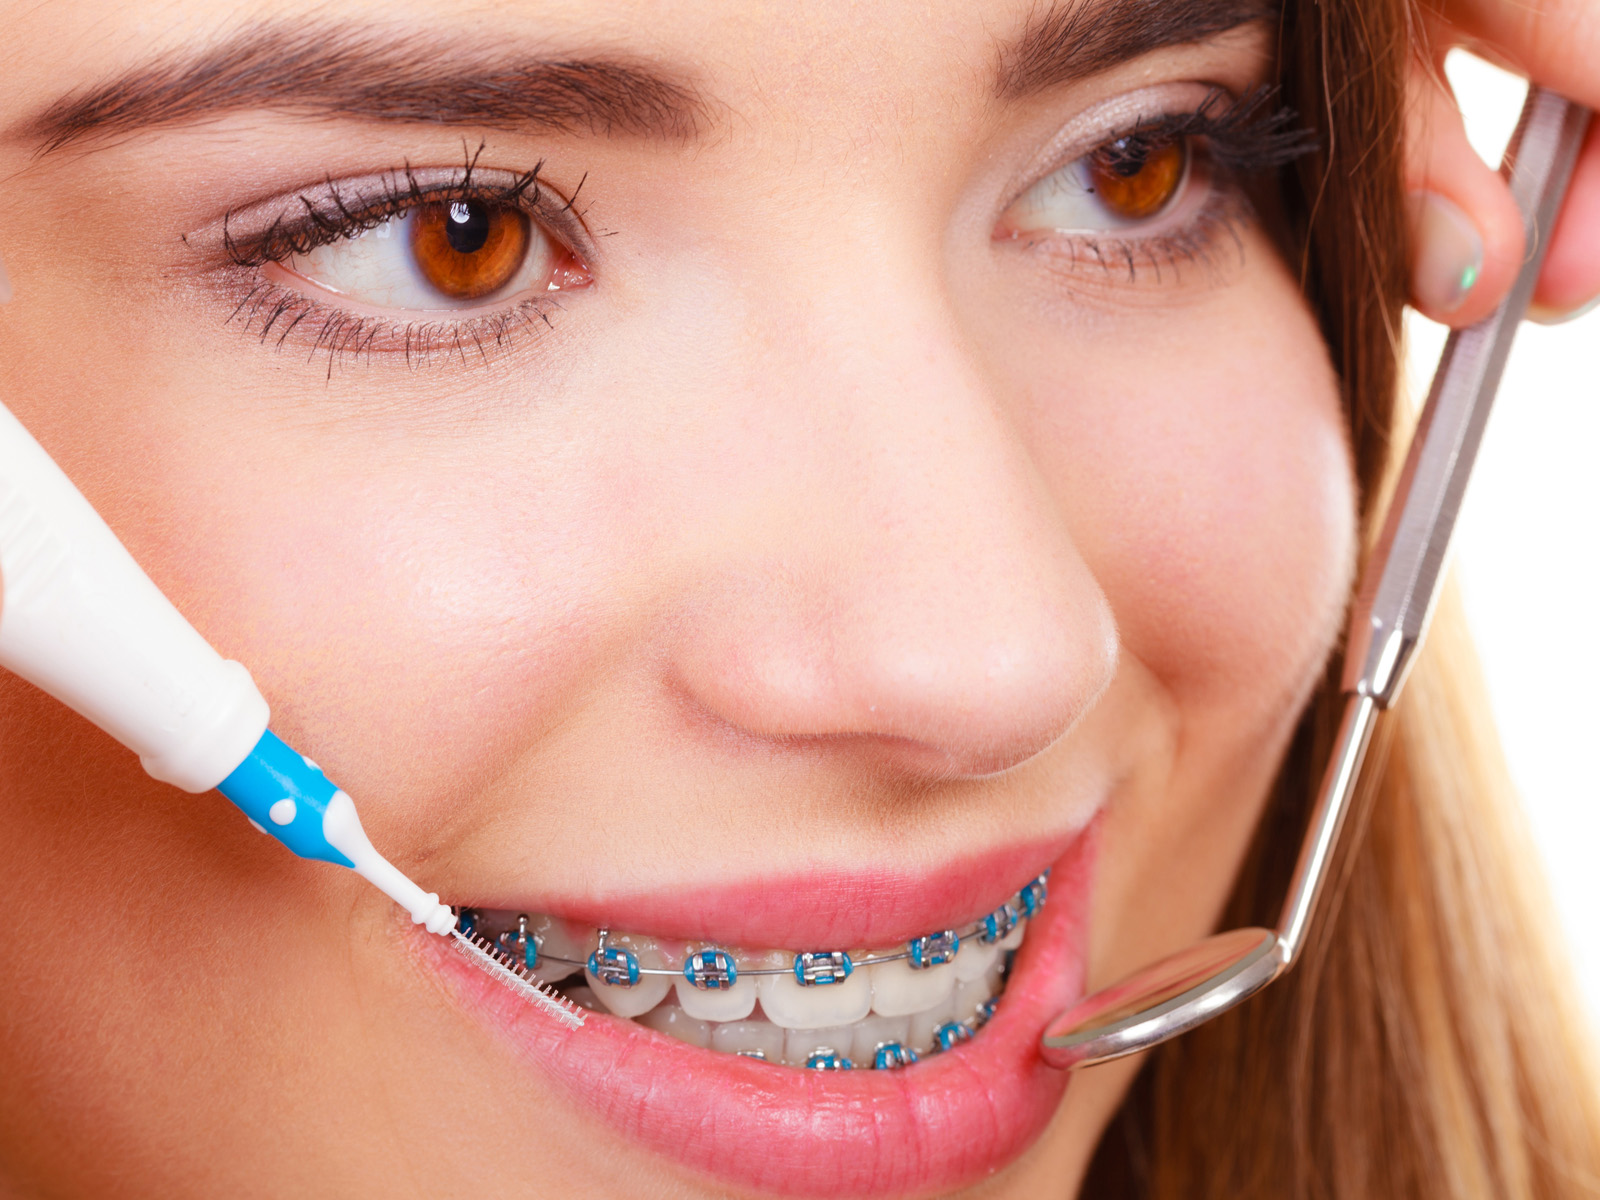 How to deal with cavities while wearing braces